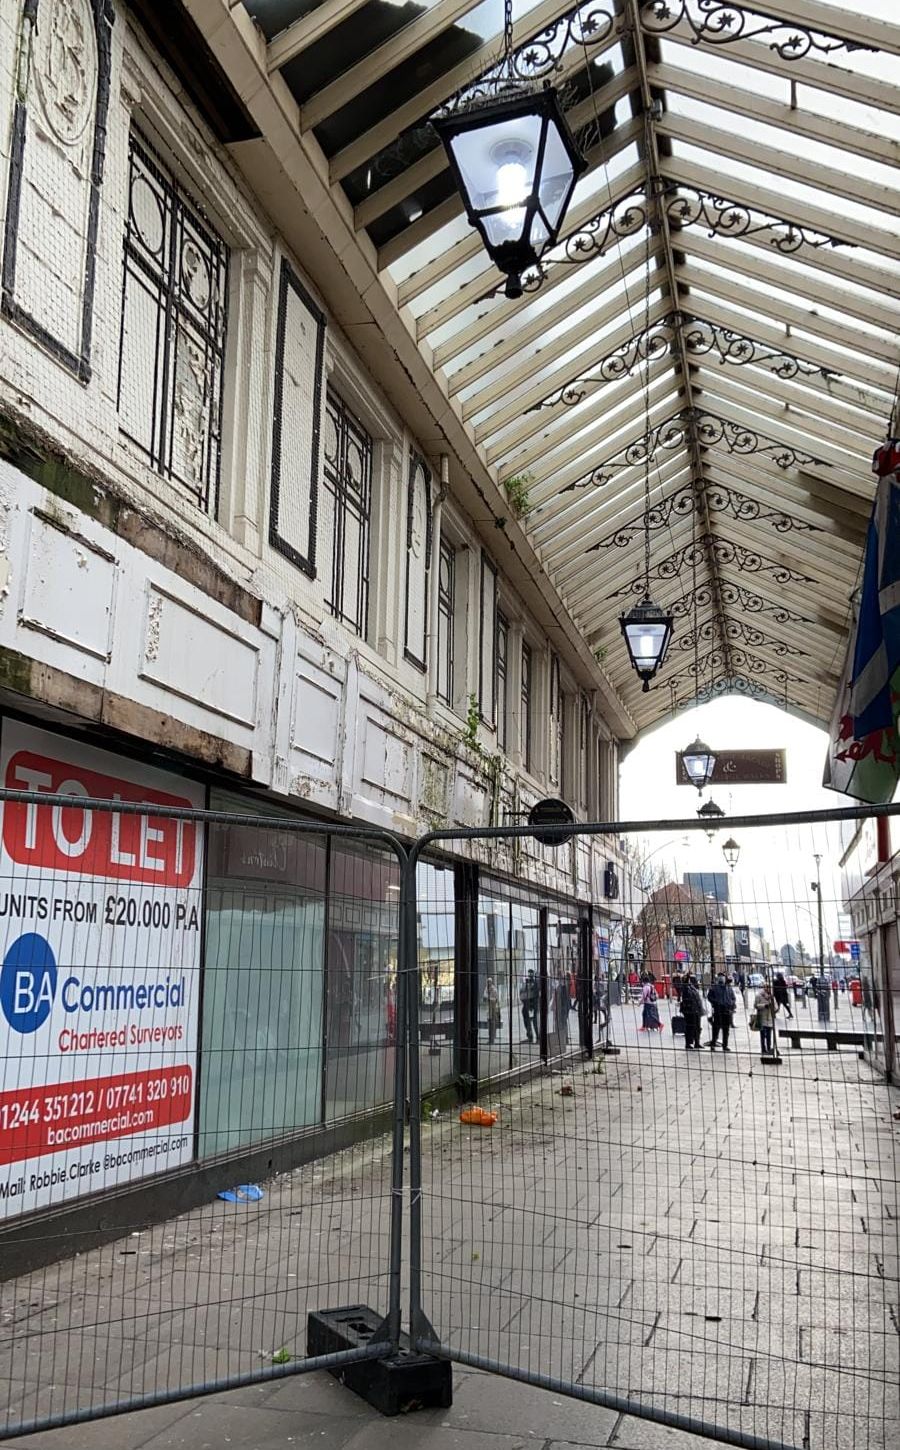 Cambridge Arcade in Southport, at the Chapel Street end, was closed on Saturday morning due to wind damage. All the businesses remain open. You can gain access through. Lord Street Sharrock Street or through Cambridge walks. Photo by Paul Dawbarn